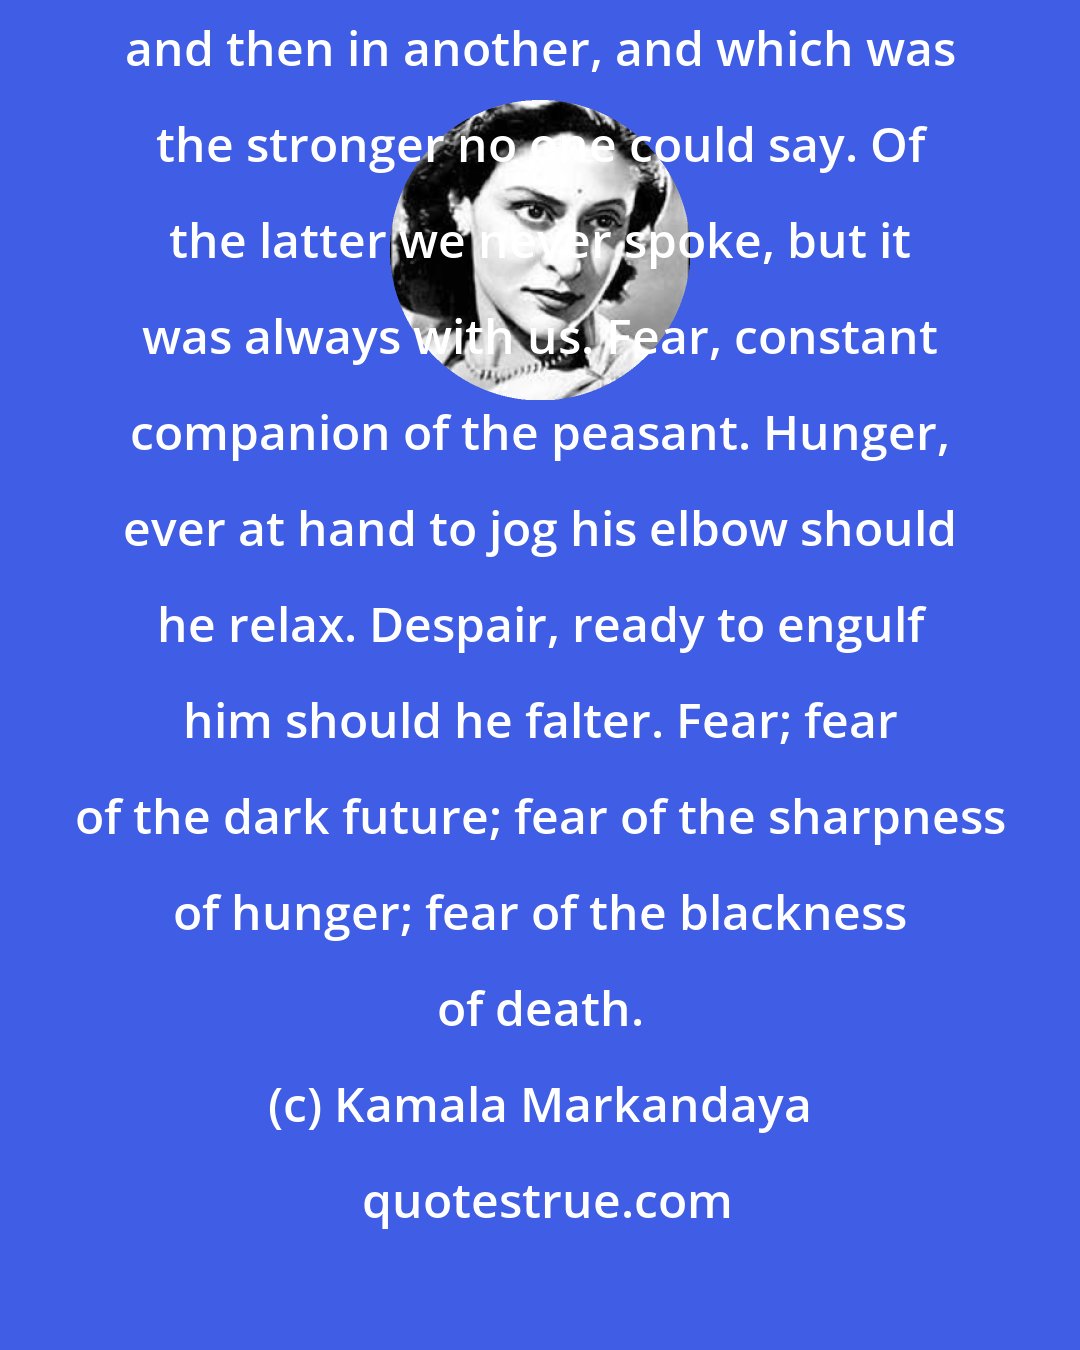 Kamala Markandaya: Hope, and fear. Twin forces that tugged at us first in one direction and then in another, and which was the stronger no one could say. Of the latter we never spoke, but it was always with us. Fear, constant companion of the peasant. Hunger, ever at hand to jog his elbow should he relax. Despair, ready to engulf him should he falter. Fear; fear of the dark future; fear of the sharpness of hunger; fear of the blackness of death.